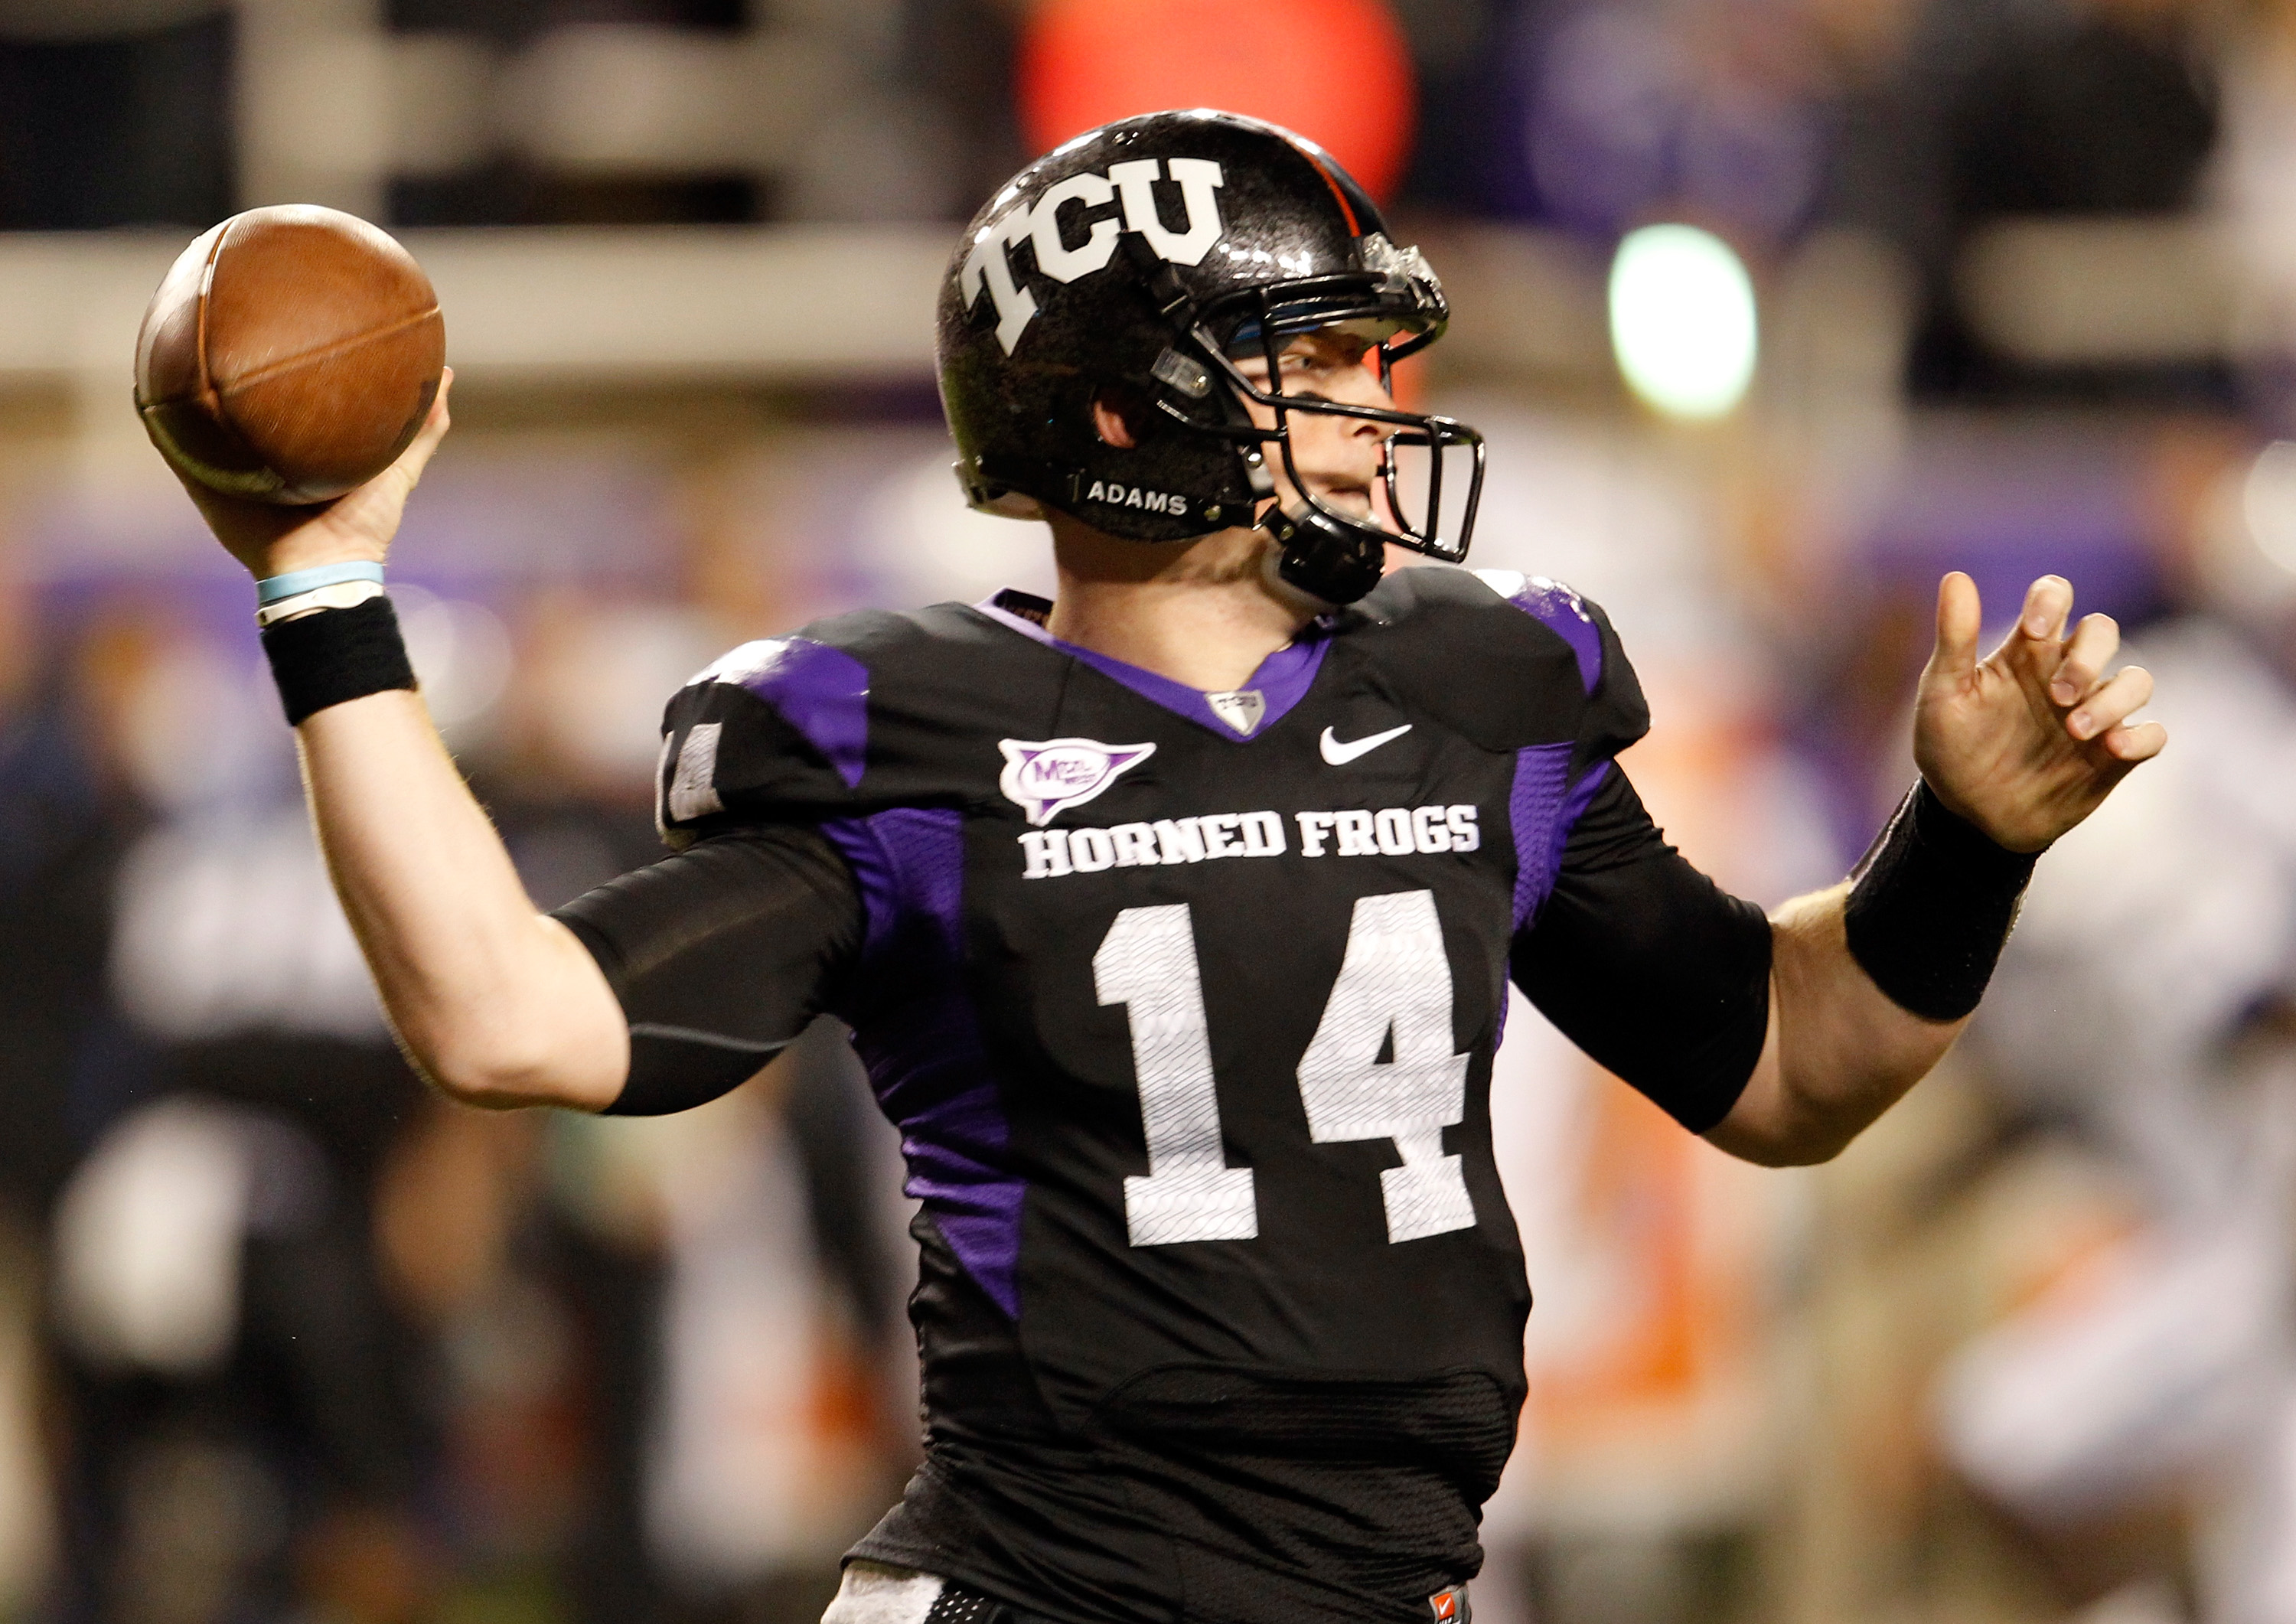 FORT WORTH, TX - OCTOBER 23:  Quarterback Andy Dalton #14 of the TCU Horned Frogs passes the ball against the Air Force Falcons at Amon G. Carter Stadium on October 23, 2010 in Fort Worth, Texas.  (Photo by Tom Pennington/Getty Images)